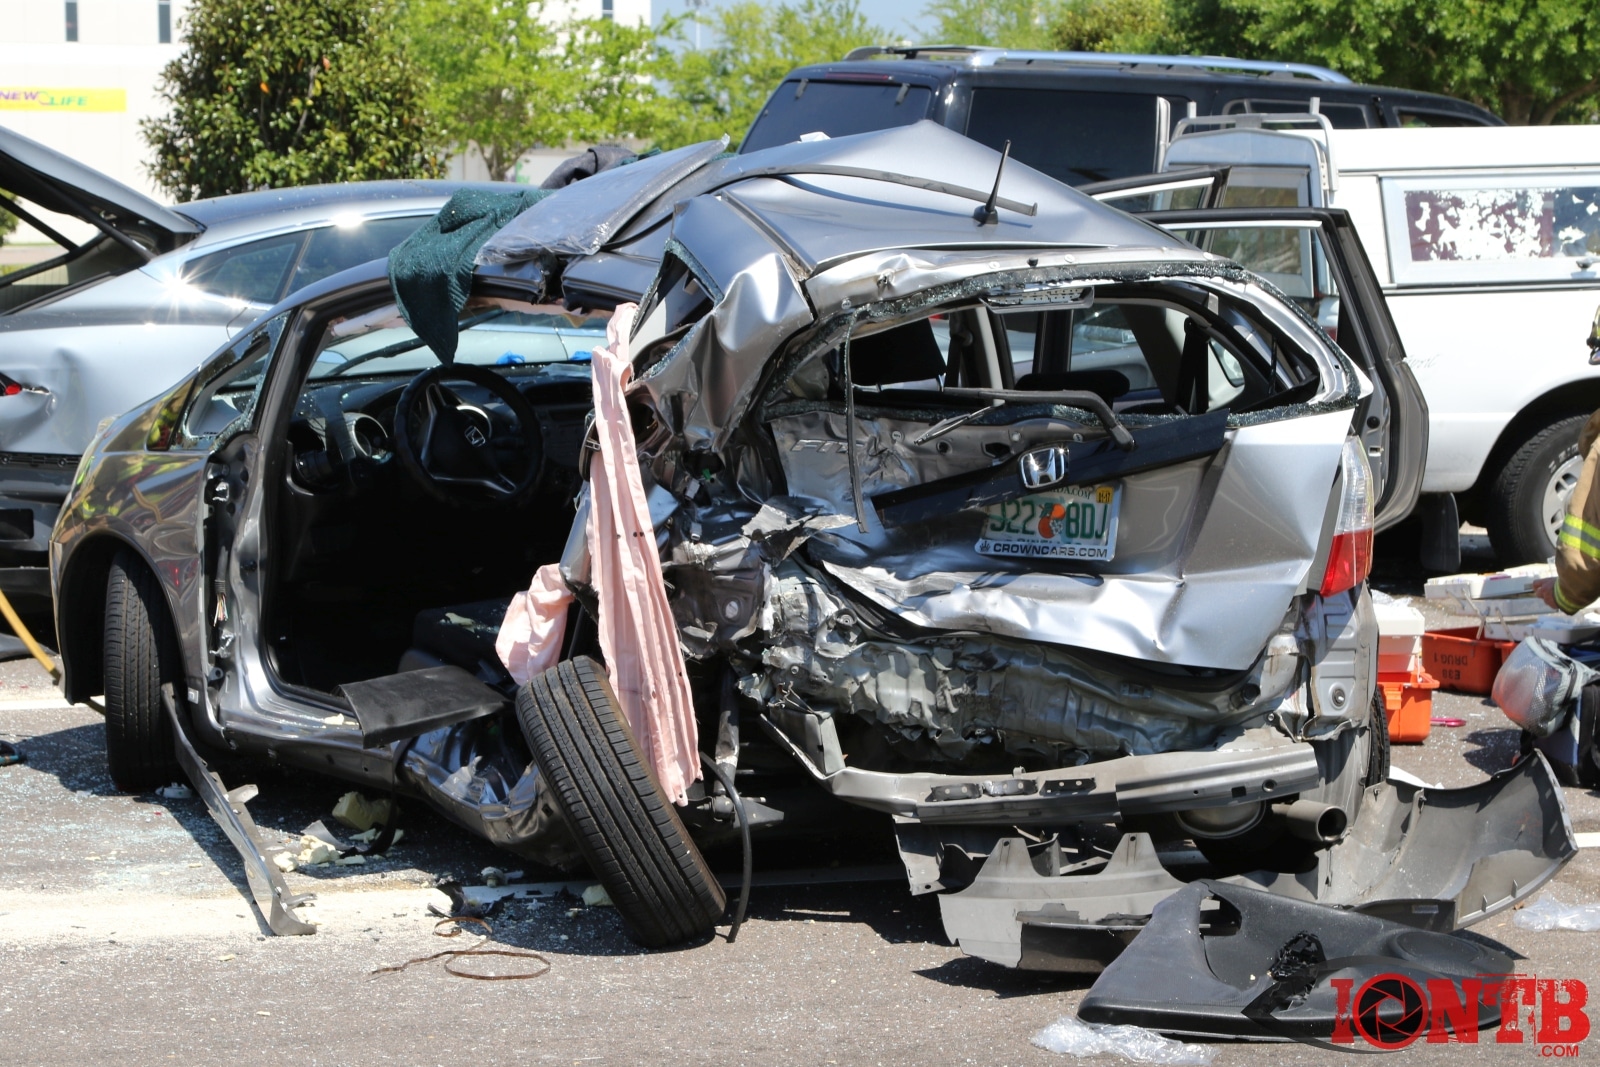 One Injured in Extrication Crash This Afternoon on Bryan Dairy Road in Pinellas Park